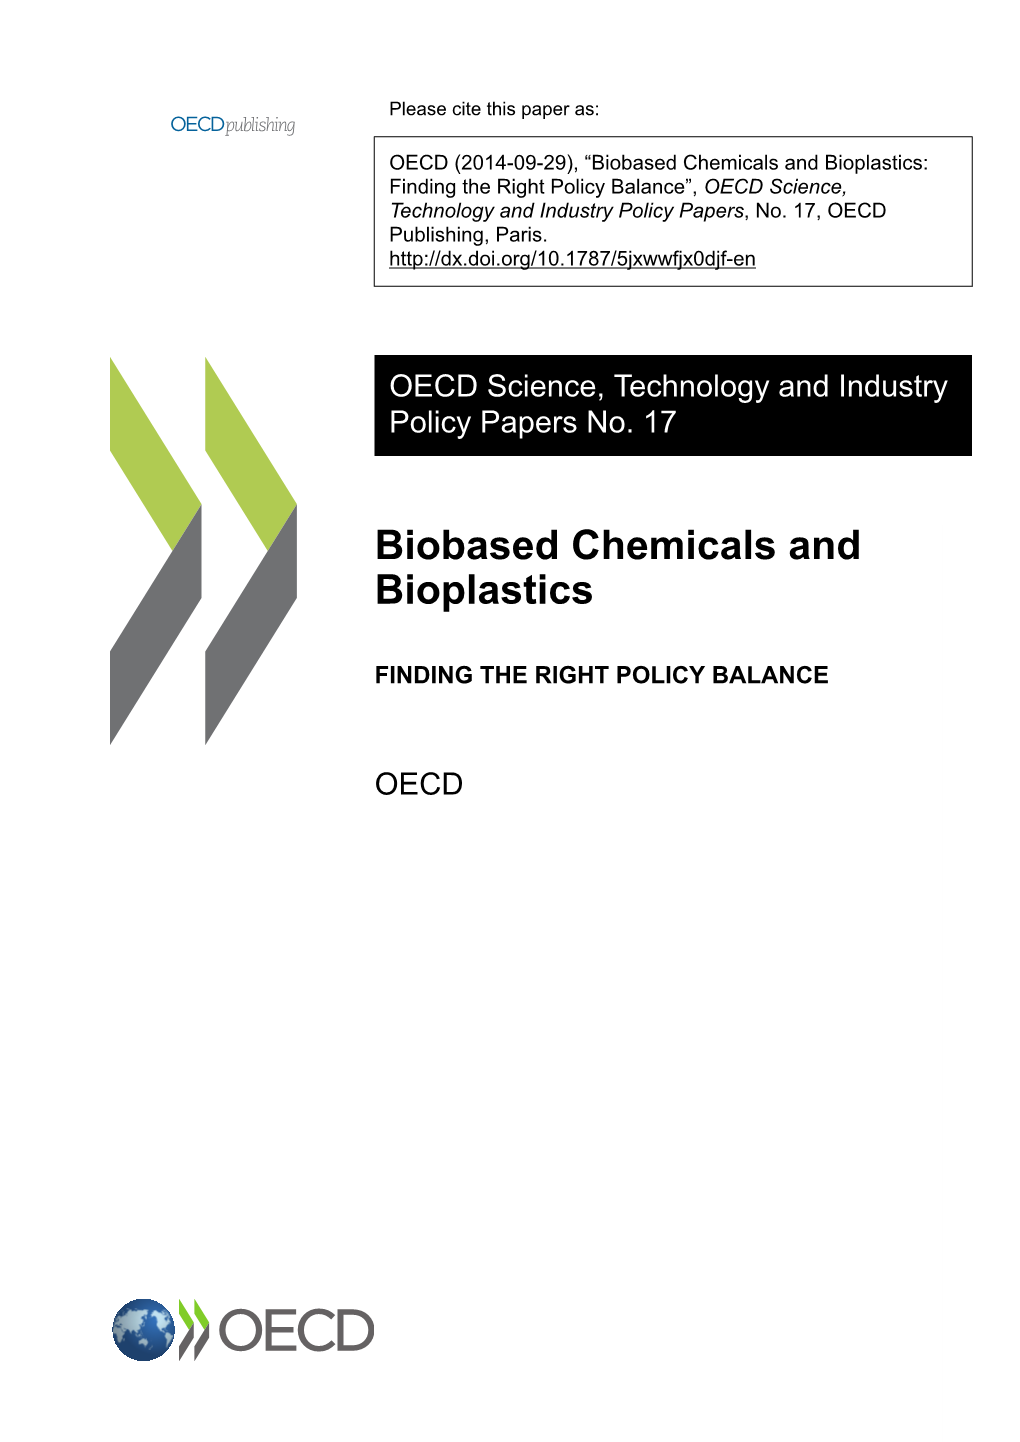 Biobased Chemicals and Bioplastics: Finding the Right Policy Balance”, OECD Science, Technology and Industry Policy Papers, No